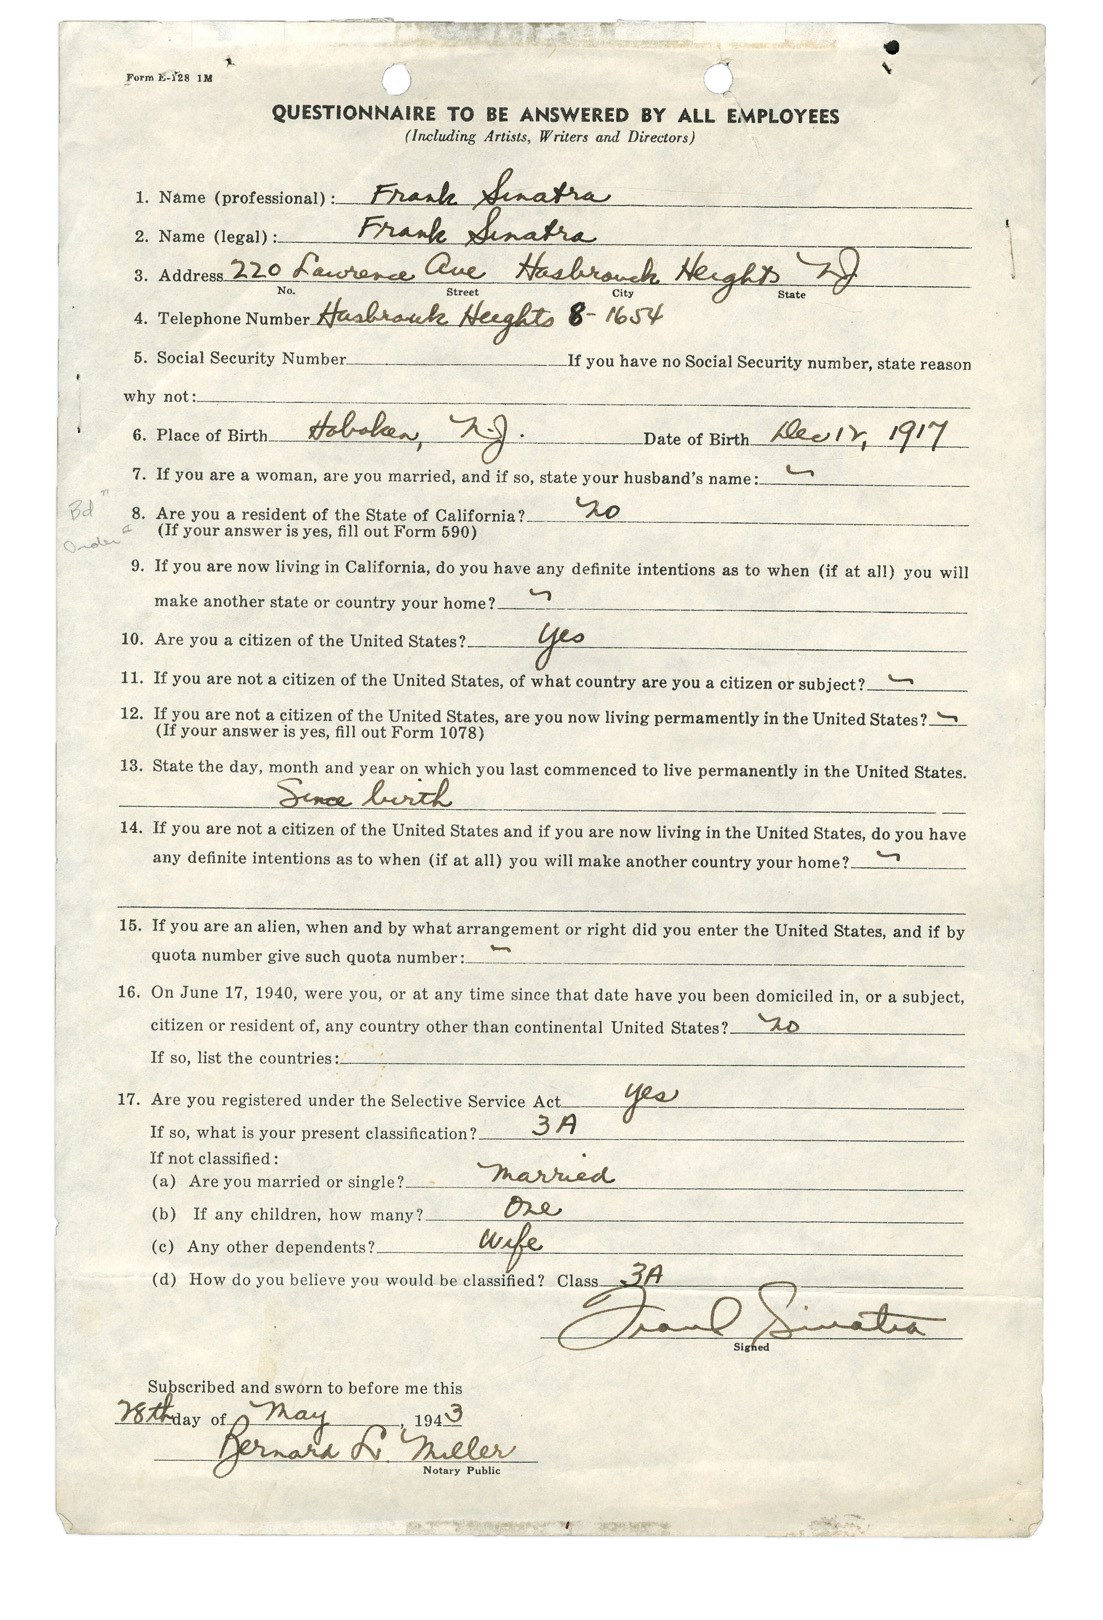 - 1943 Frank Sinatra Columbia Records Employee Questionnaire - Four Days Before Signing (JSA)